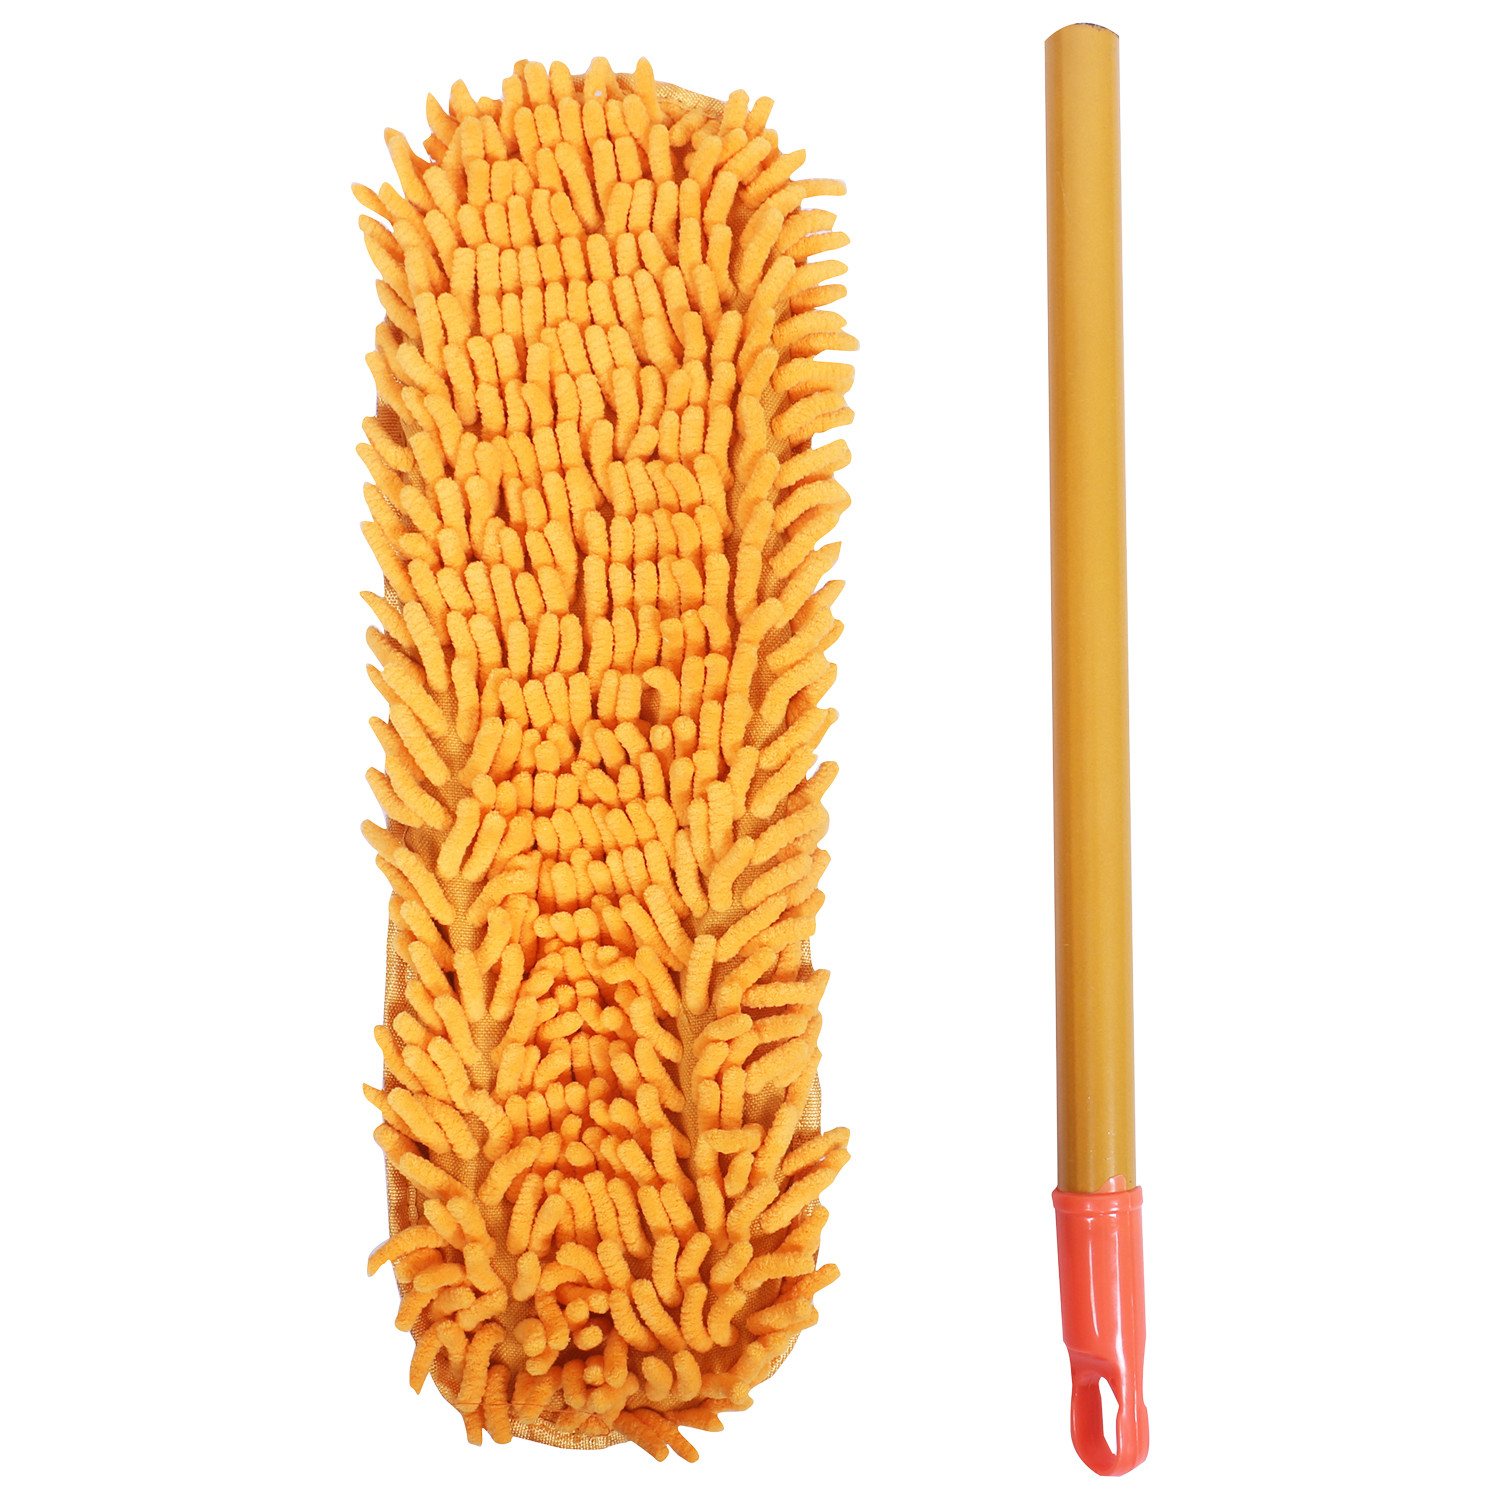 Kuber Industries Hand Duster|Microfiber Washable Cleaning Brush|Stainless Steel Detachable Handle Dusting Brush For Car|House Cleaning (Orange)